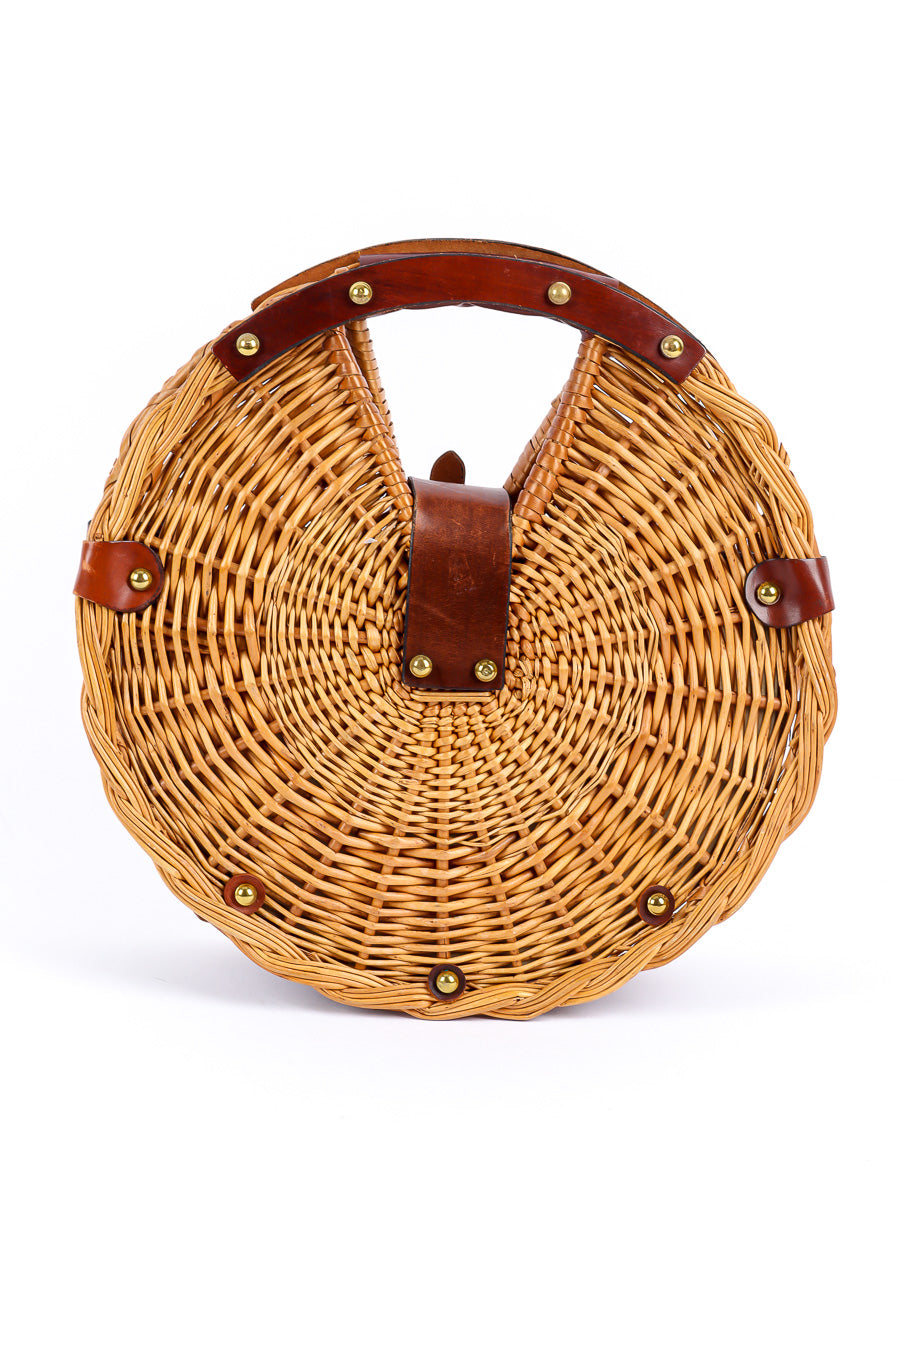 Etienne Aigner rounded wicker purse product shot @recessla